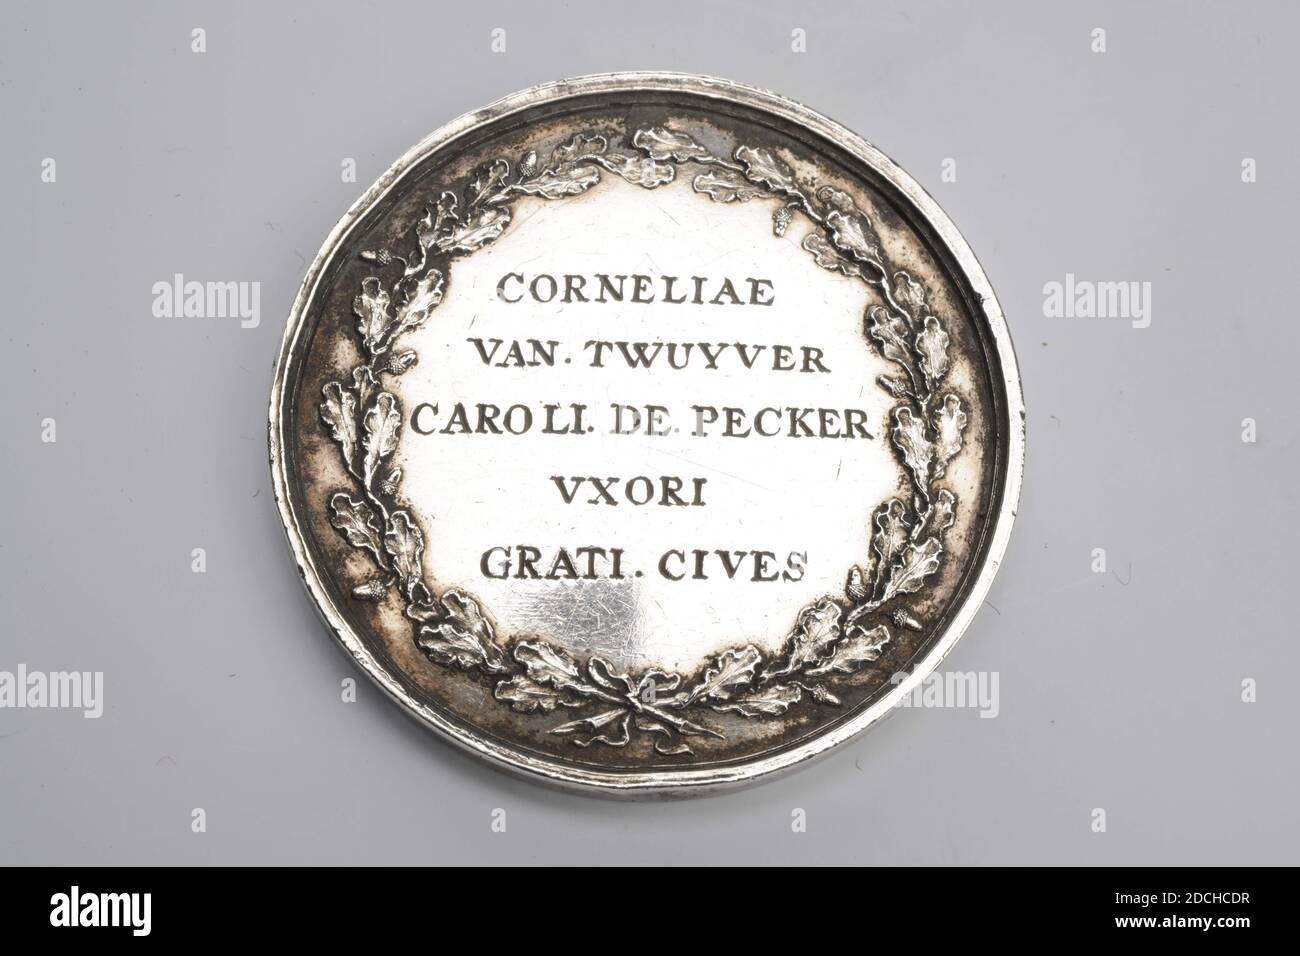 reward medal, Johan George Holtzhey, 1784, General: 3.4 x 0.2cm (34 x 2mm), Weight: 12.3g, city virgin, woman, city coat of arms, Silver badge to stop the riot against Trago in 1784 in Leiden. The Leiden city virgin is depicted on the obverse standing on a lying figure (the riot). On her left arm she has an oval shield with the coat of arms of Leiden. In her right hand she has a spear with which she pierces the lying figure. This figure has a dagger in the right hand and a torch in the left. Below a three-line inscription: SEDITIONE COMPRESSA 9-12 IVNII. MDCCLXXXIV, and the caption VIRTUS Stock Photo